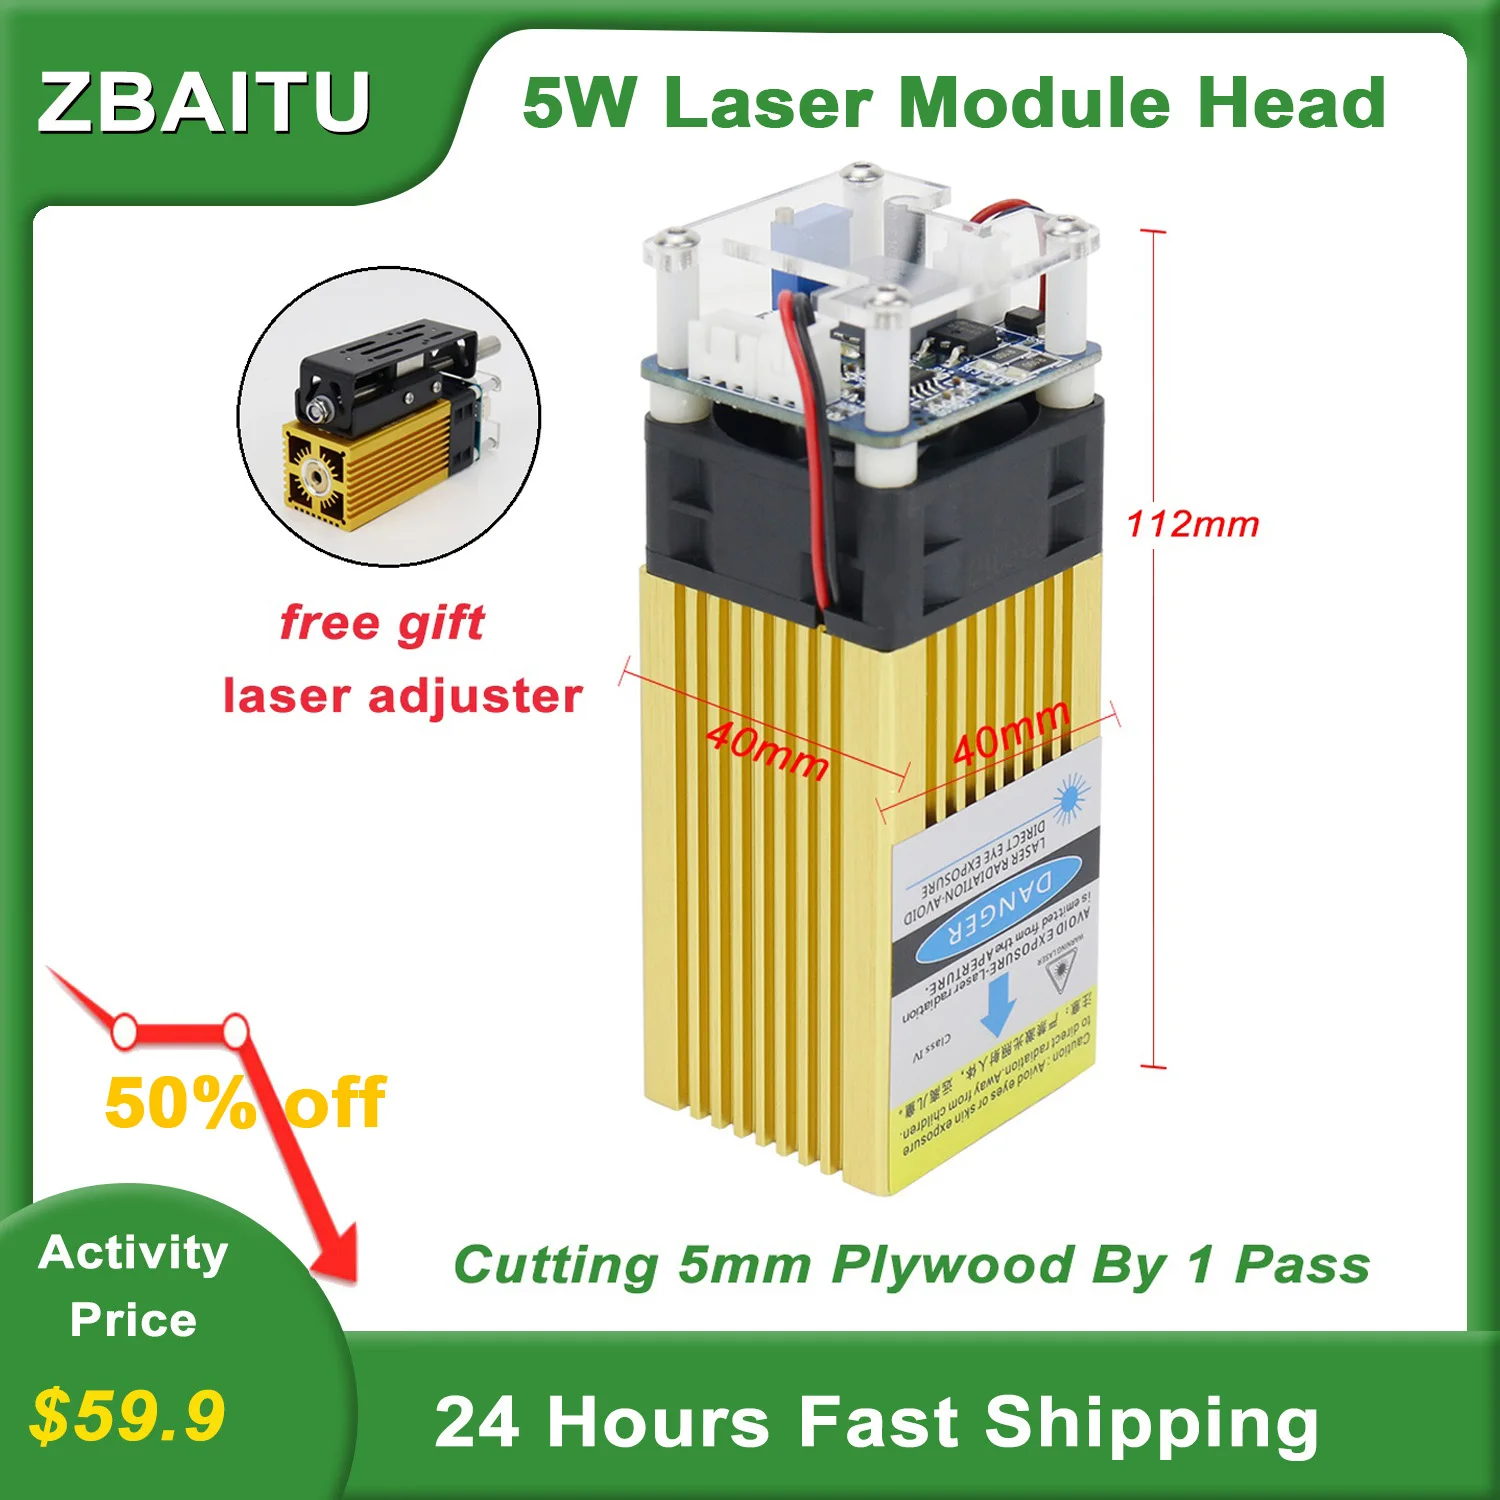 ZBAITU 450nm 40W TTL Module Fixed Focus Laser Head for DIY CNC Laser Engraver Cutter Engraving Woodworking Tools Accessories